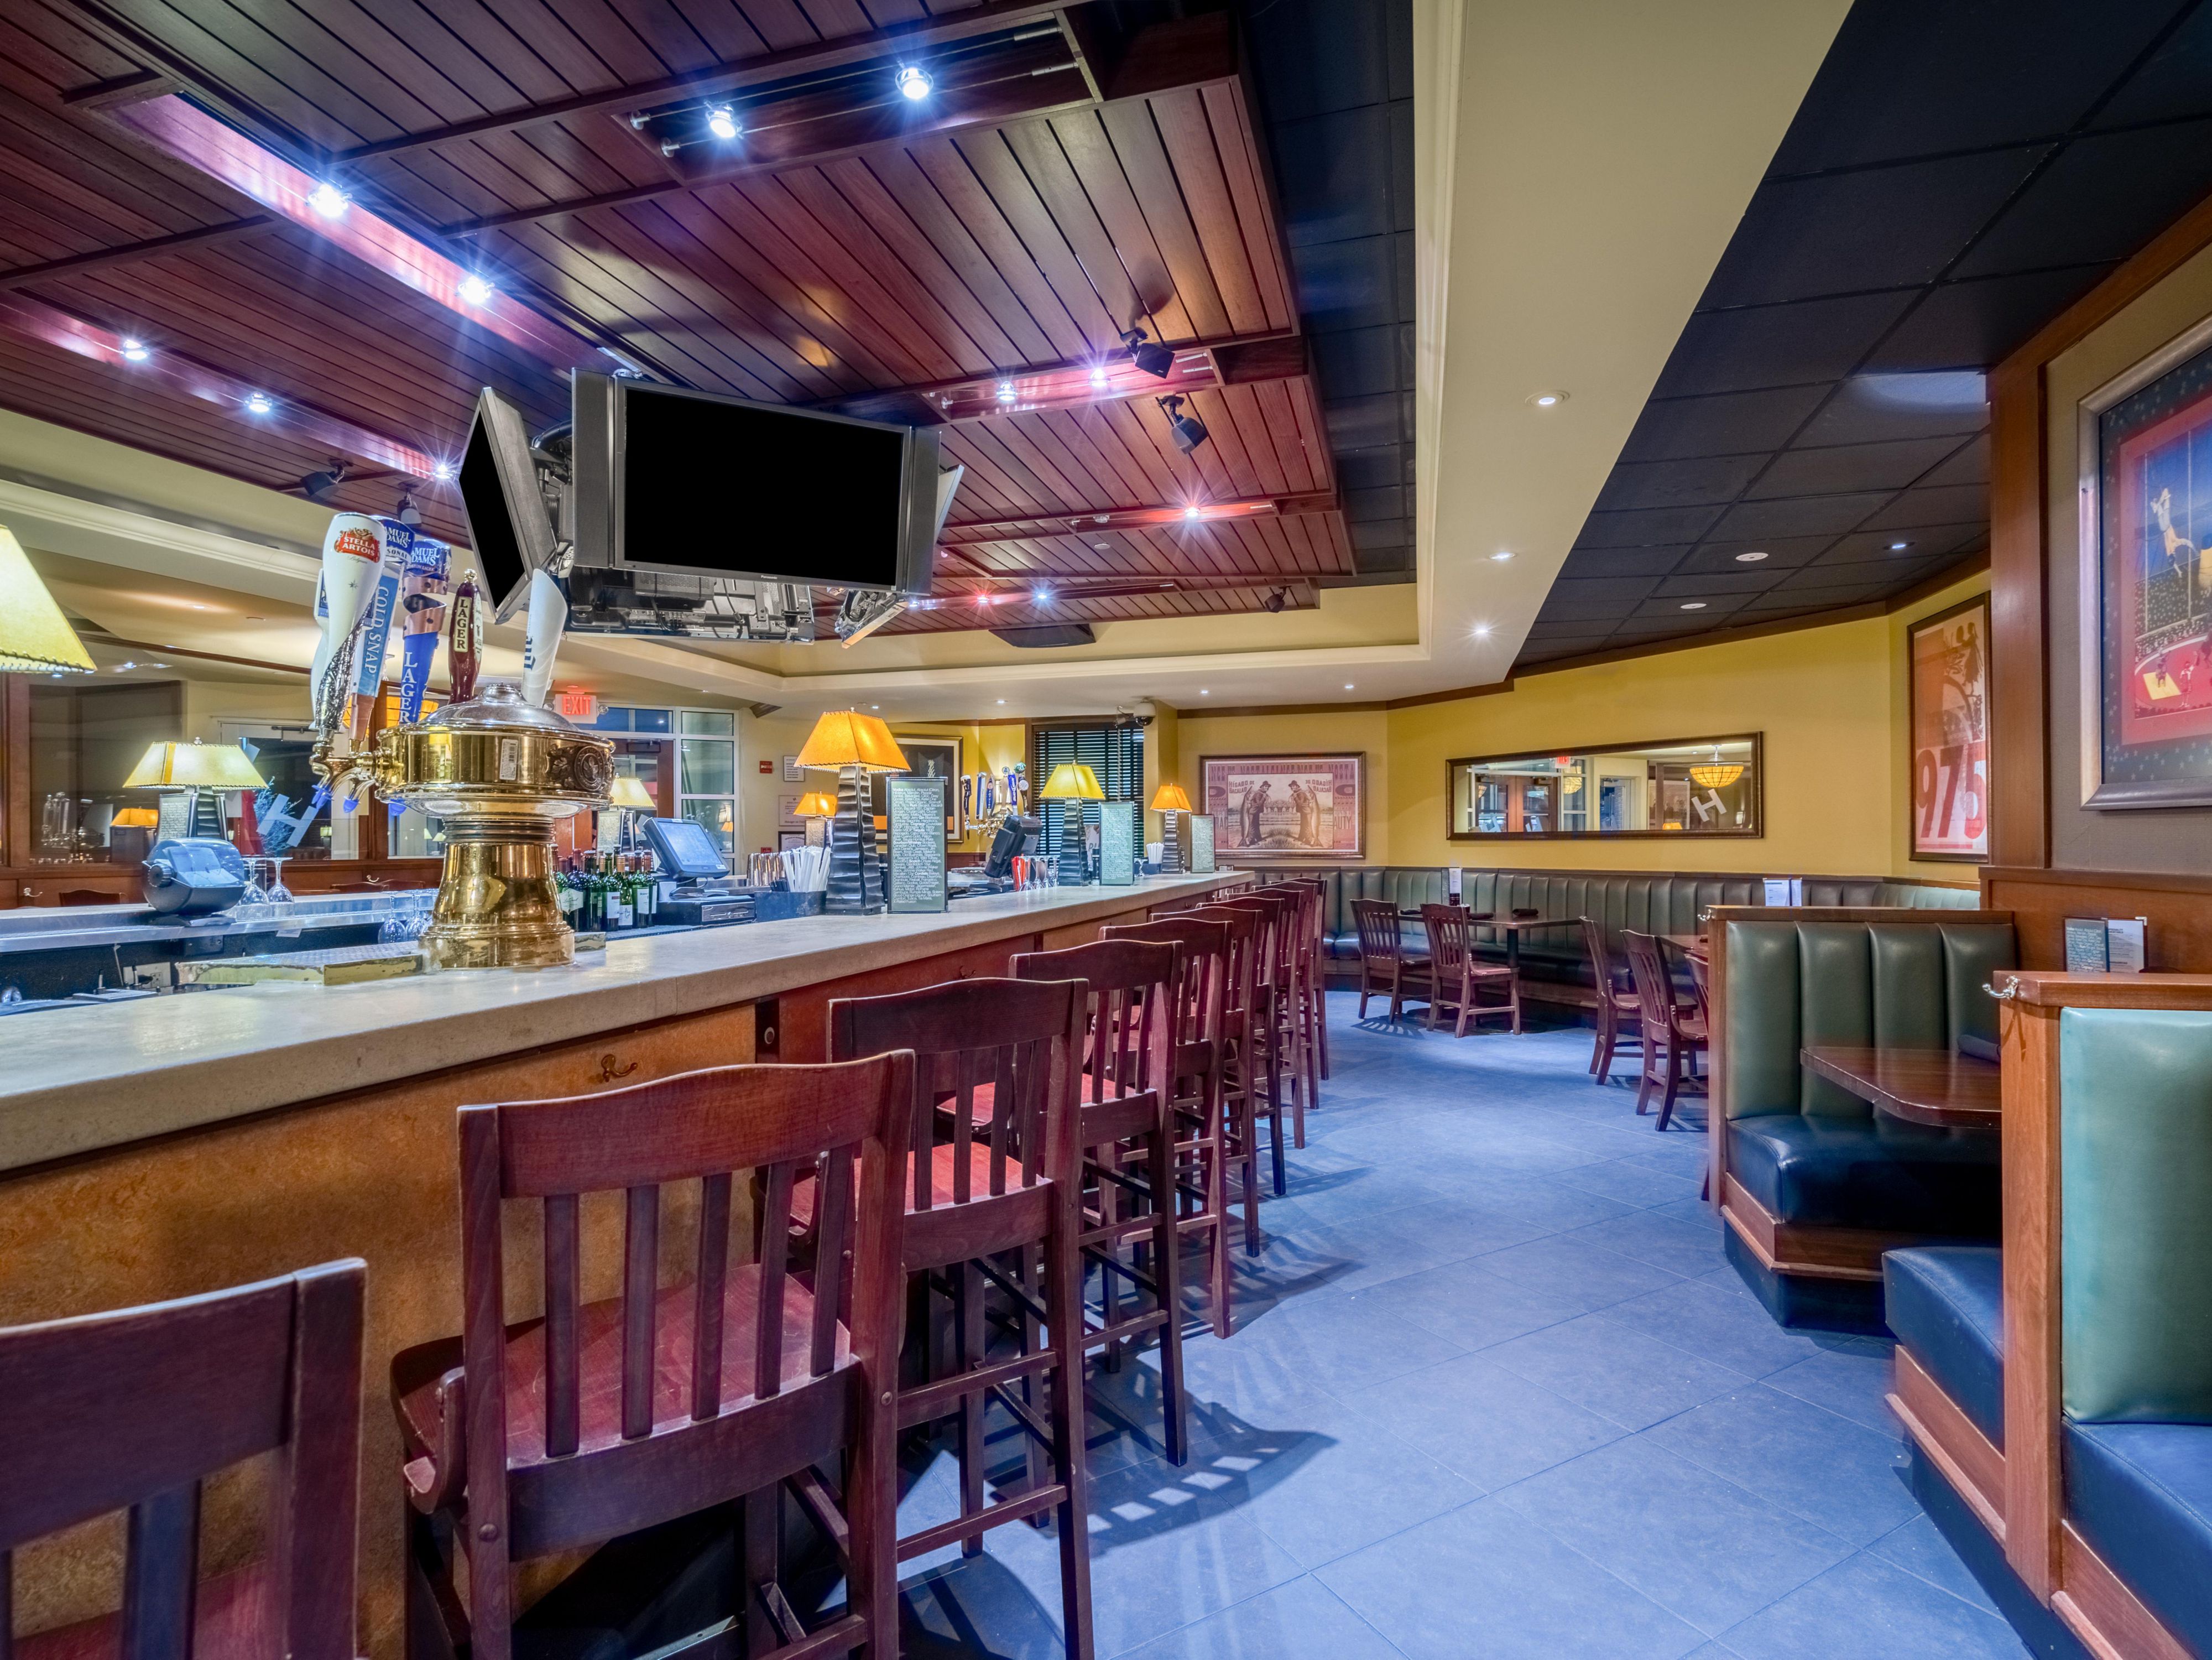 Houlihan’s is the perfect location to grab a quick lunch, host your next company happy hour, or catch the game over dinner. Visit Houlihan’s Website to view their mouthwatering menus and daily happy hour specials.